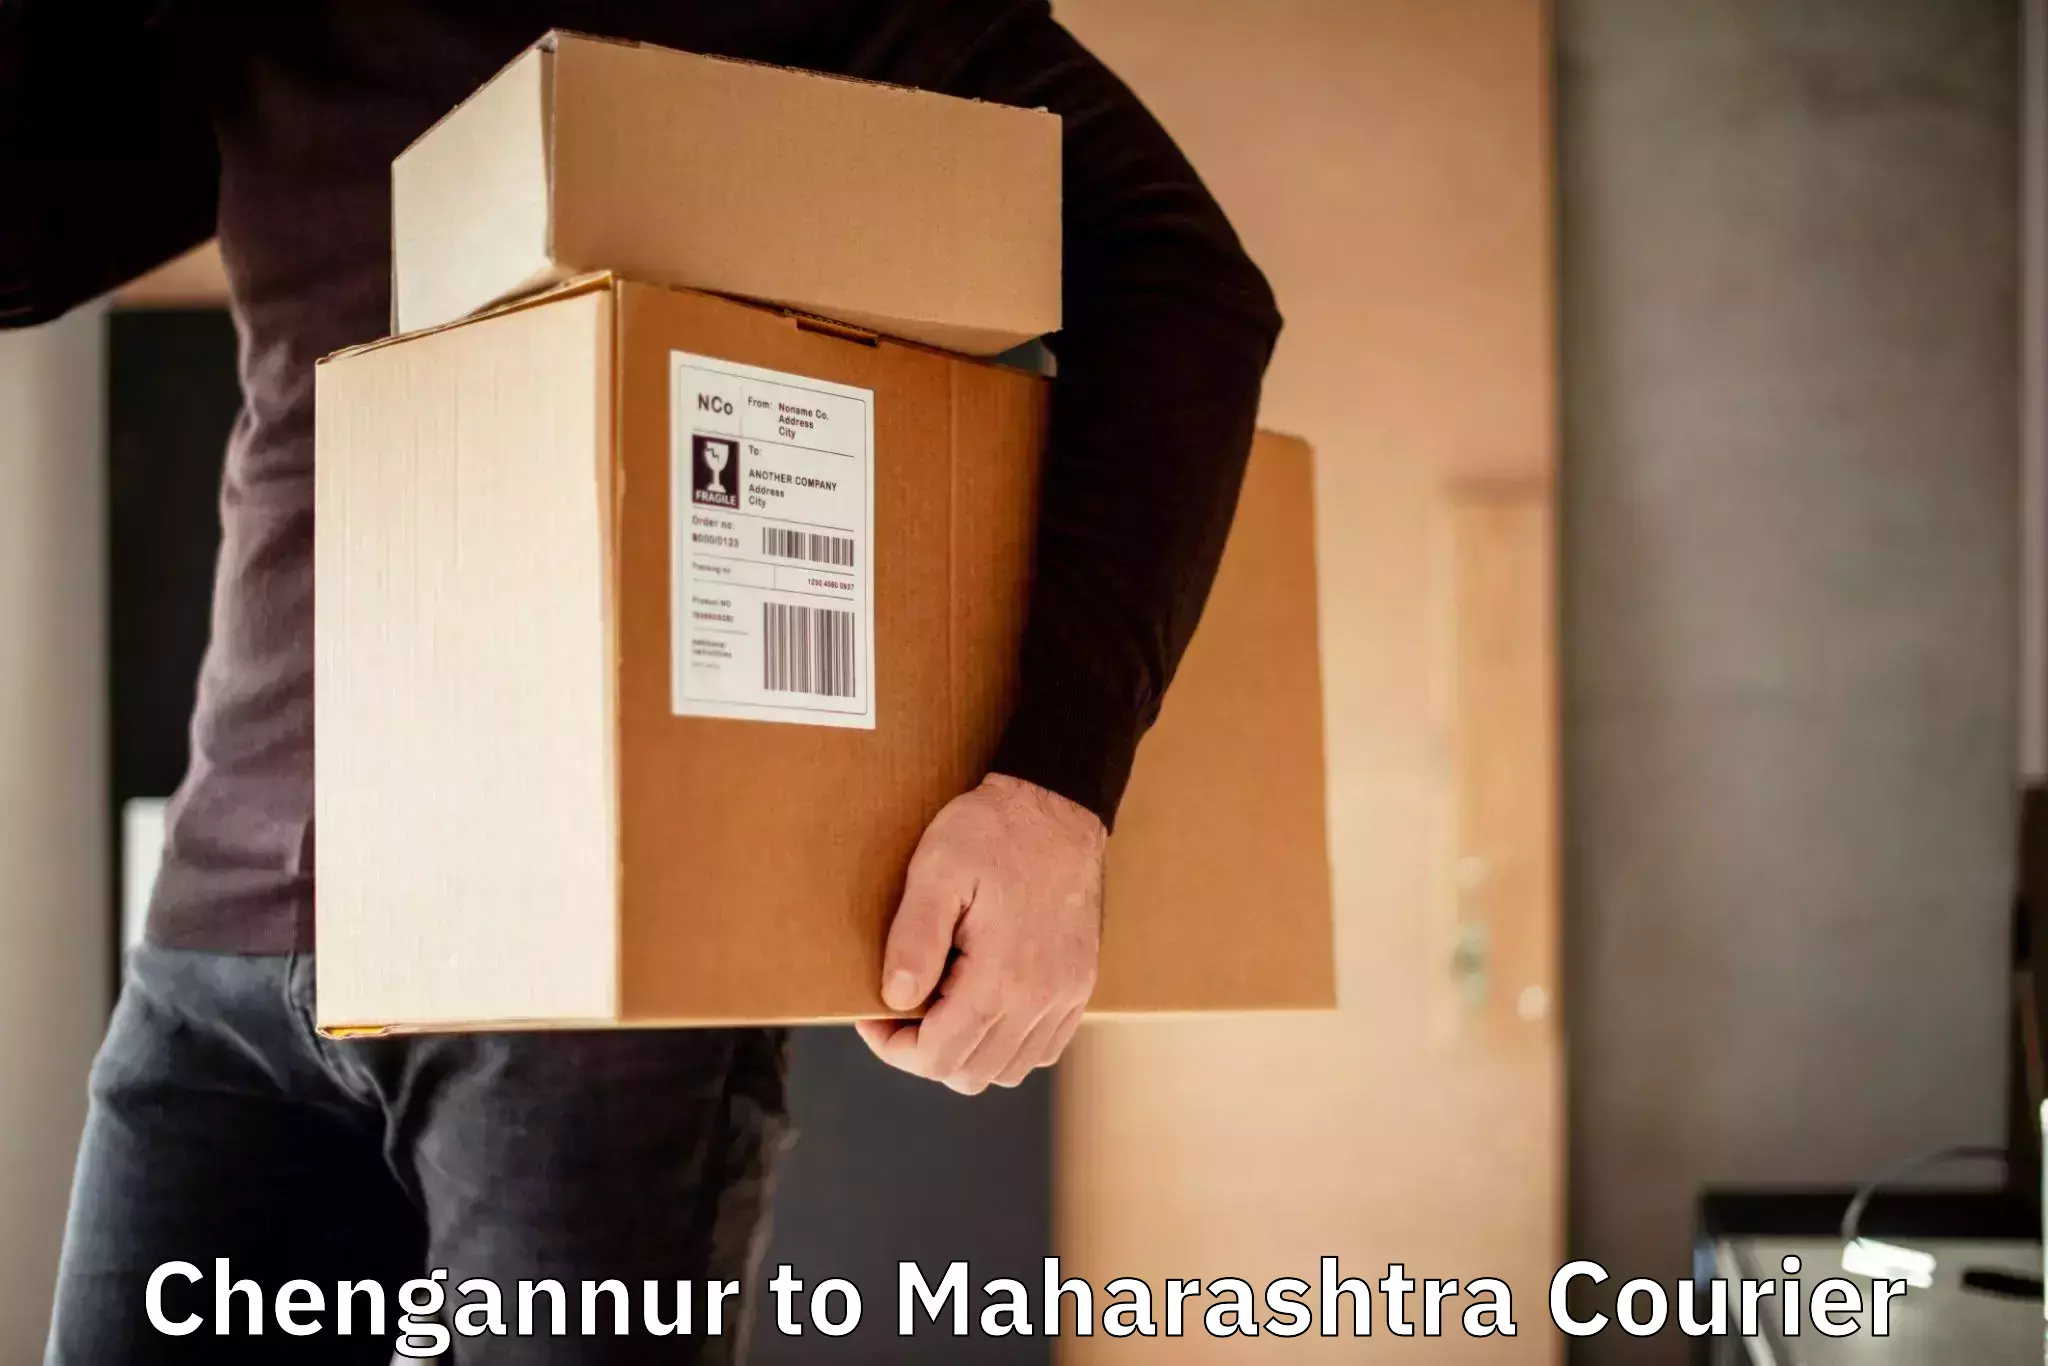 Courier dispatch services Chengannur to Chandrapur